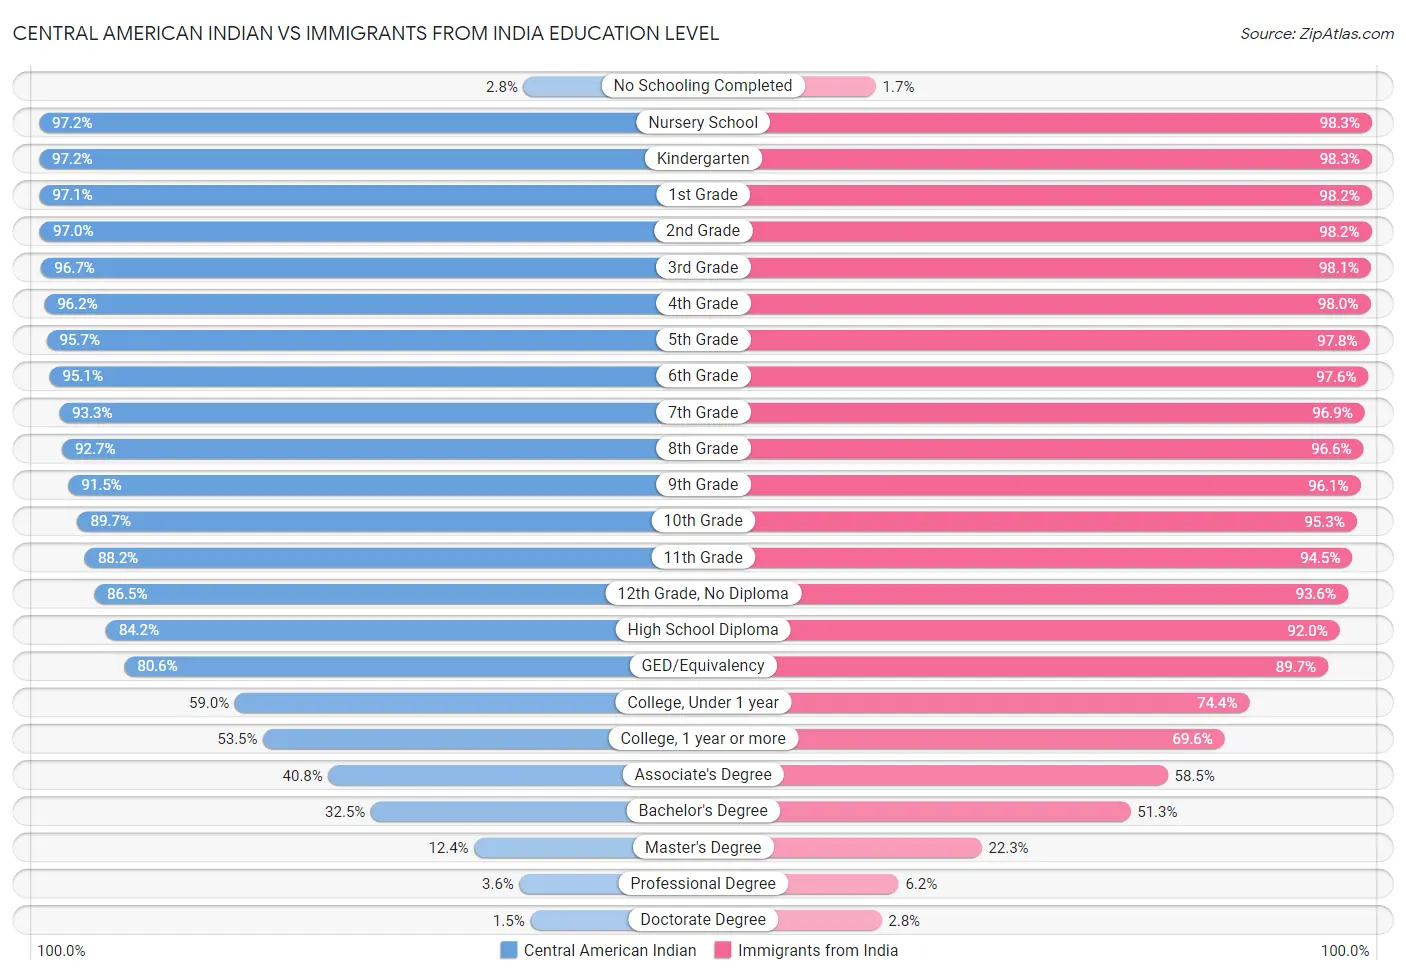 Central American Indian vs Immigrants from India Education Level